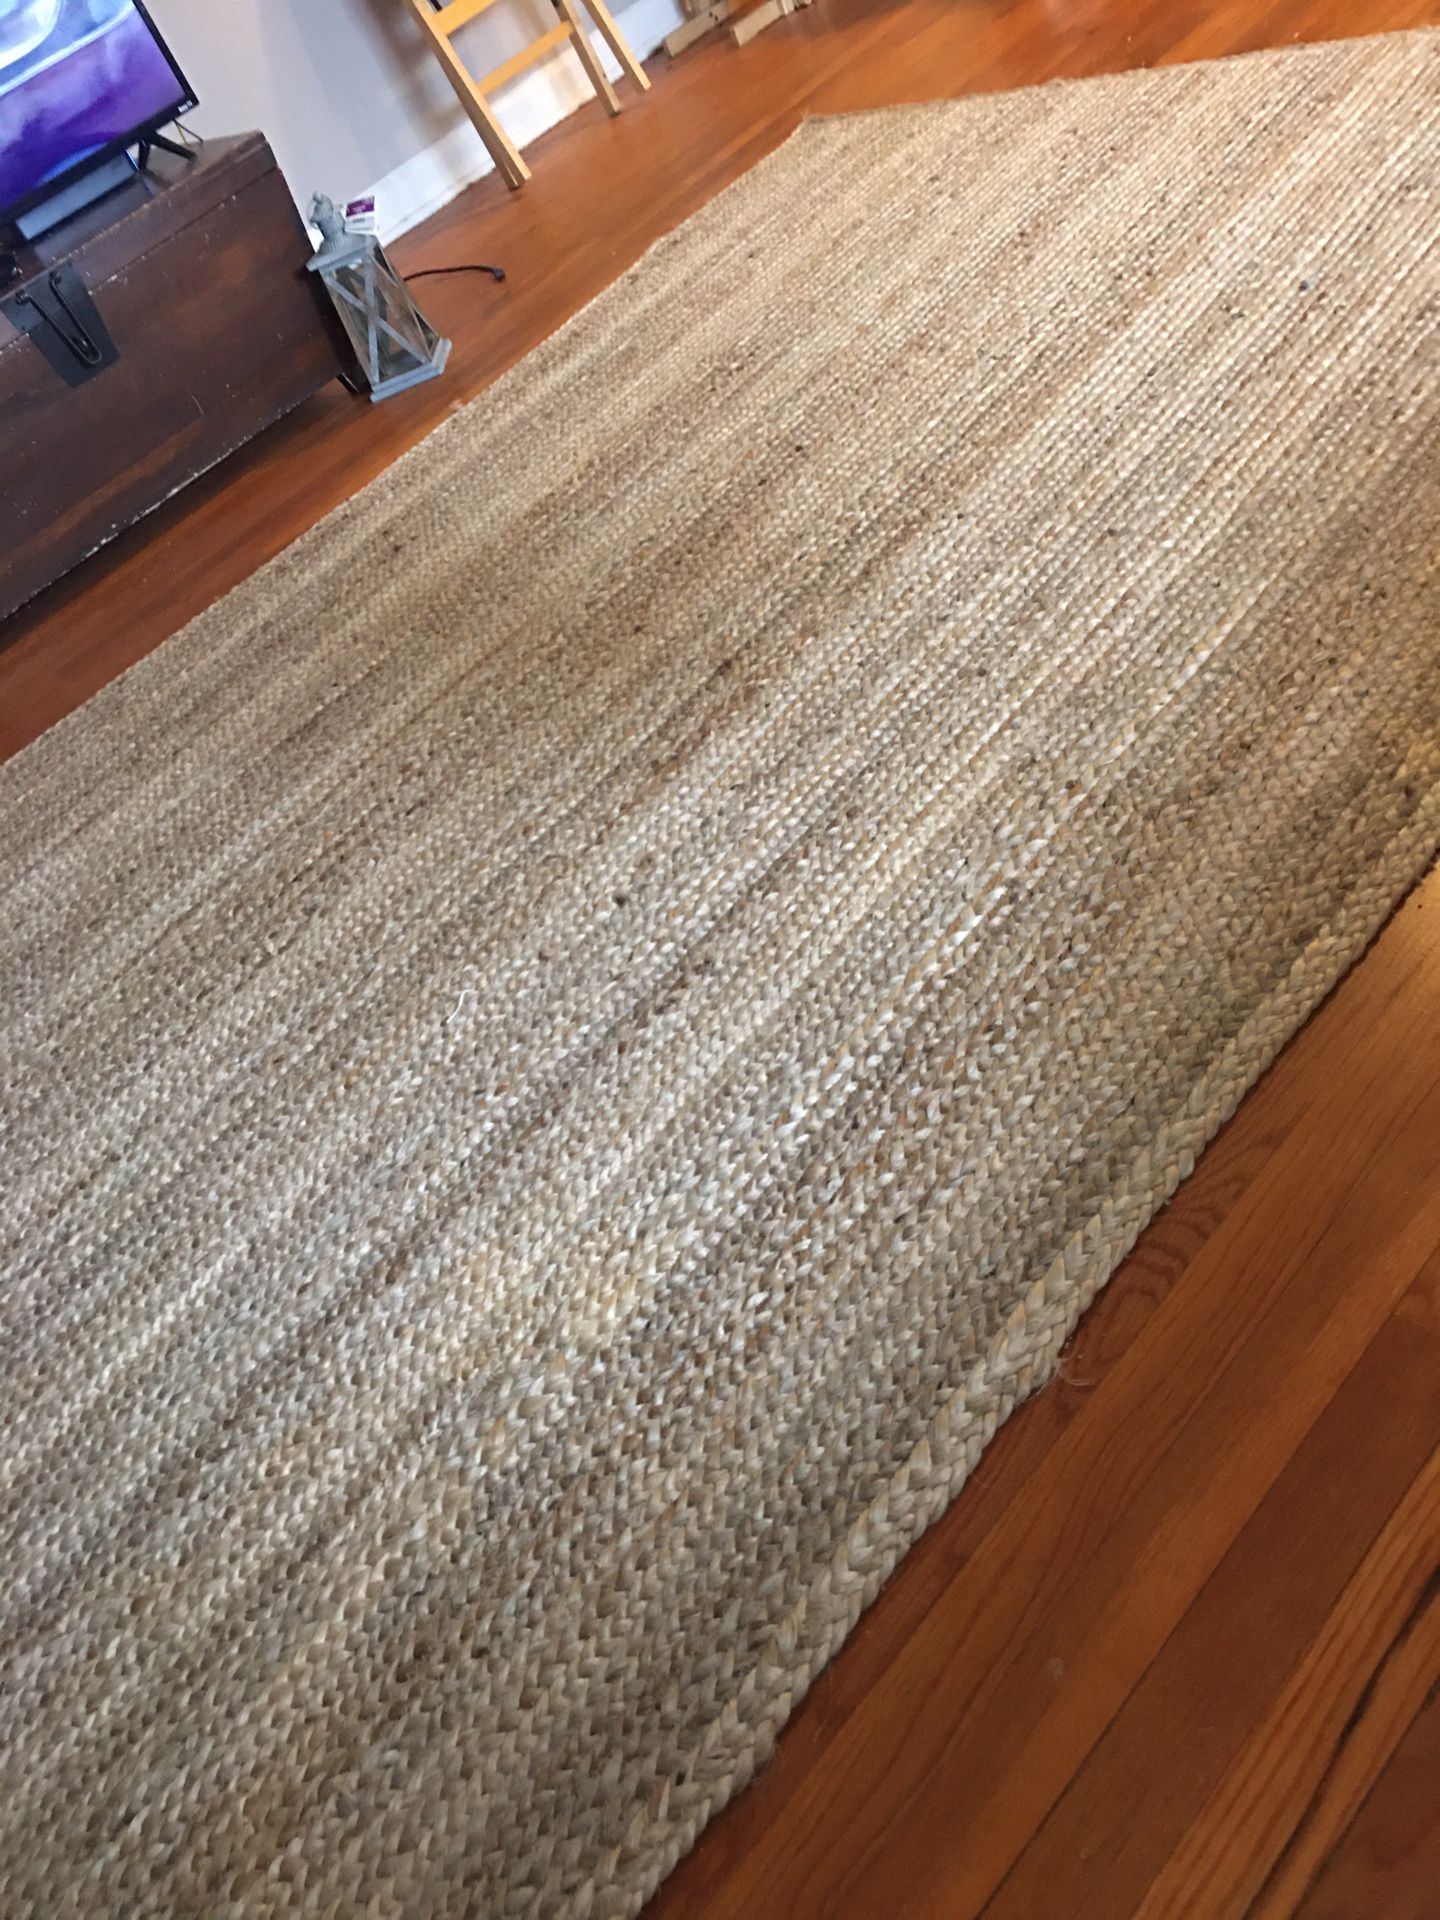 Moving Sale!!! Striped hand woven area rug 6 x 9